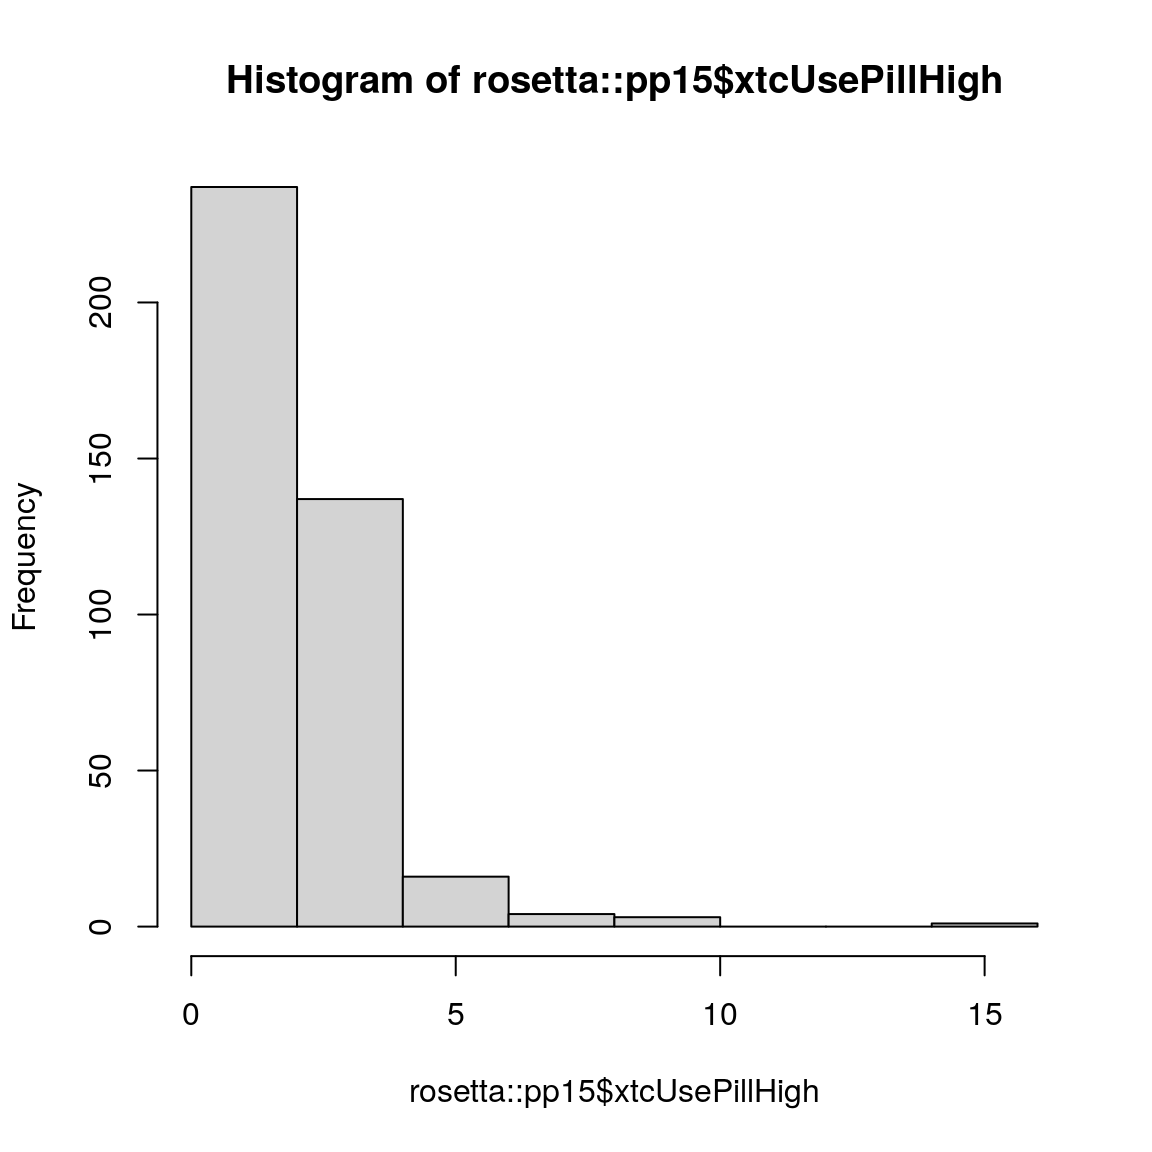 The produced box plot in R.